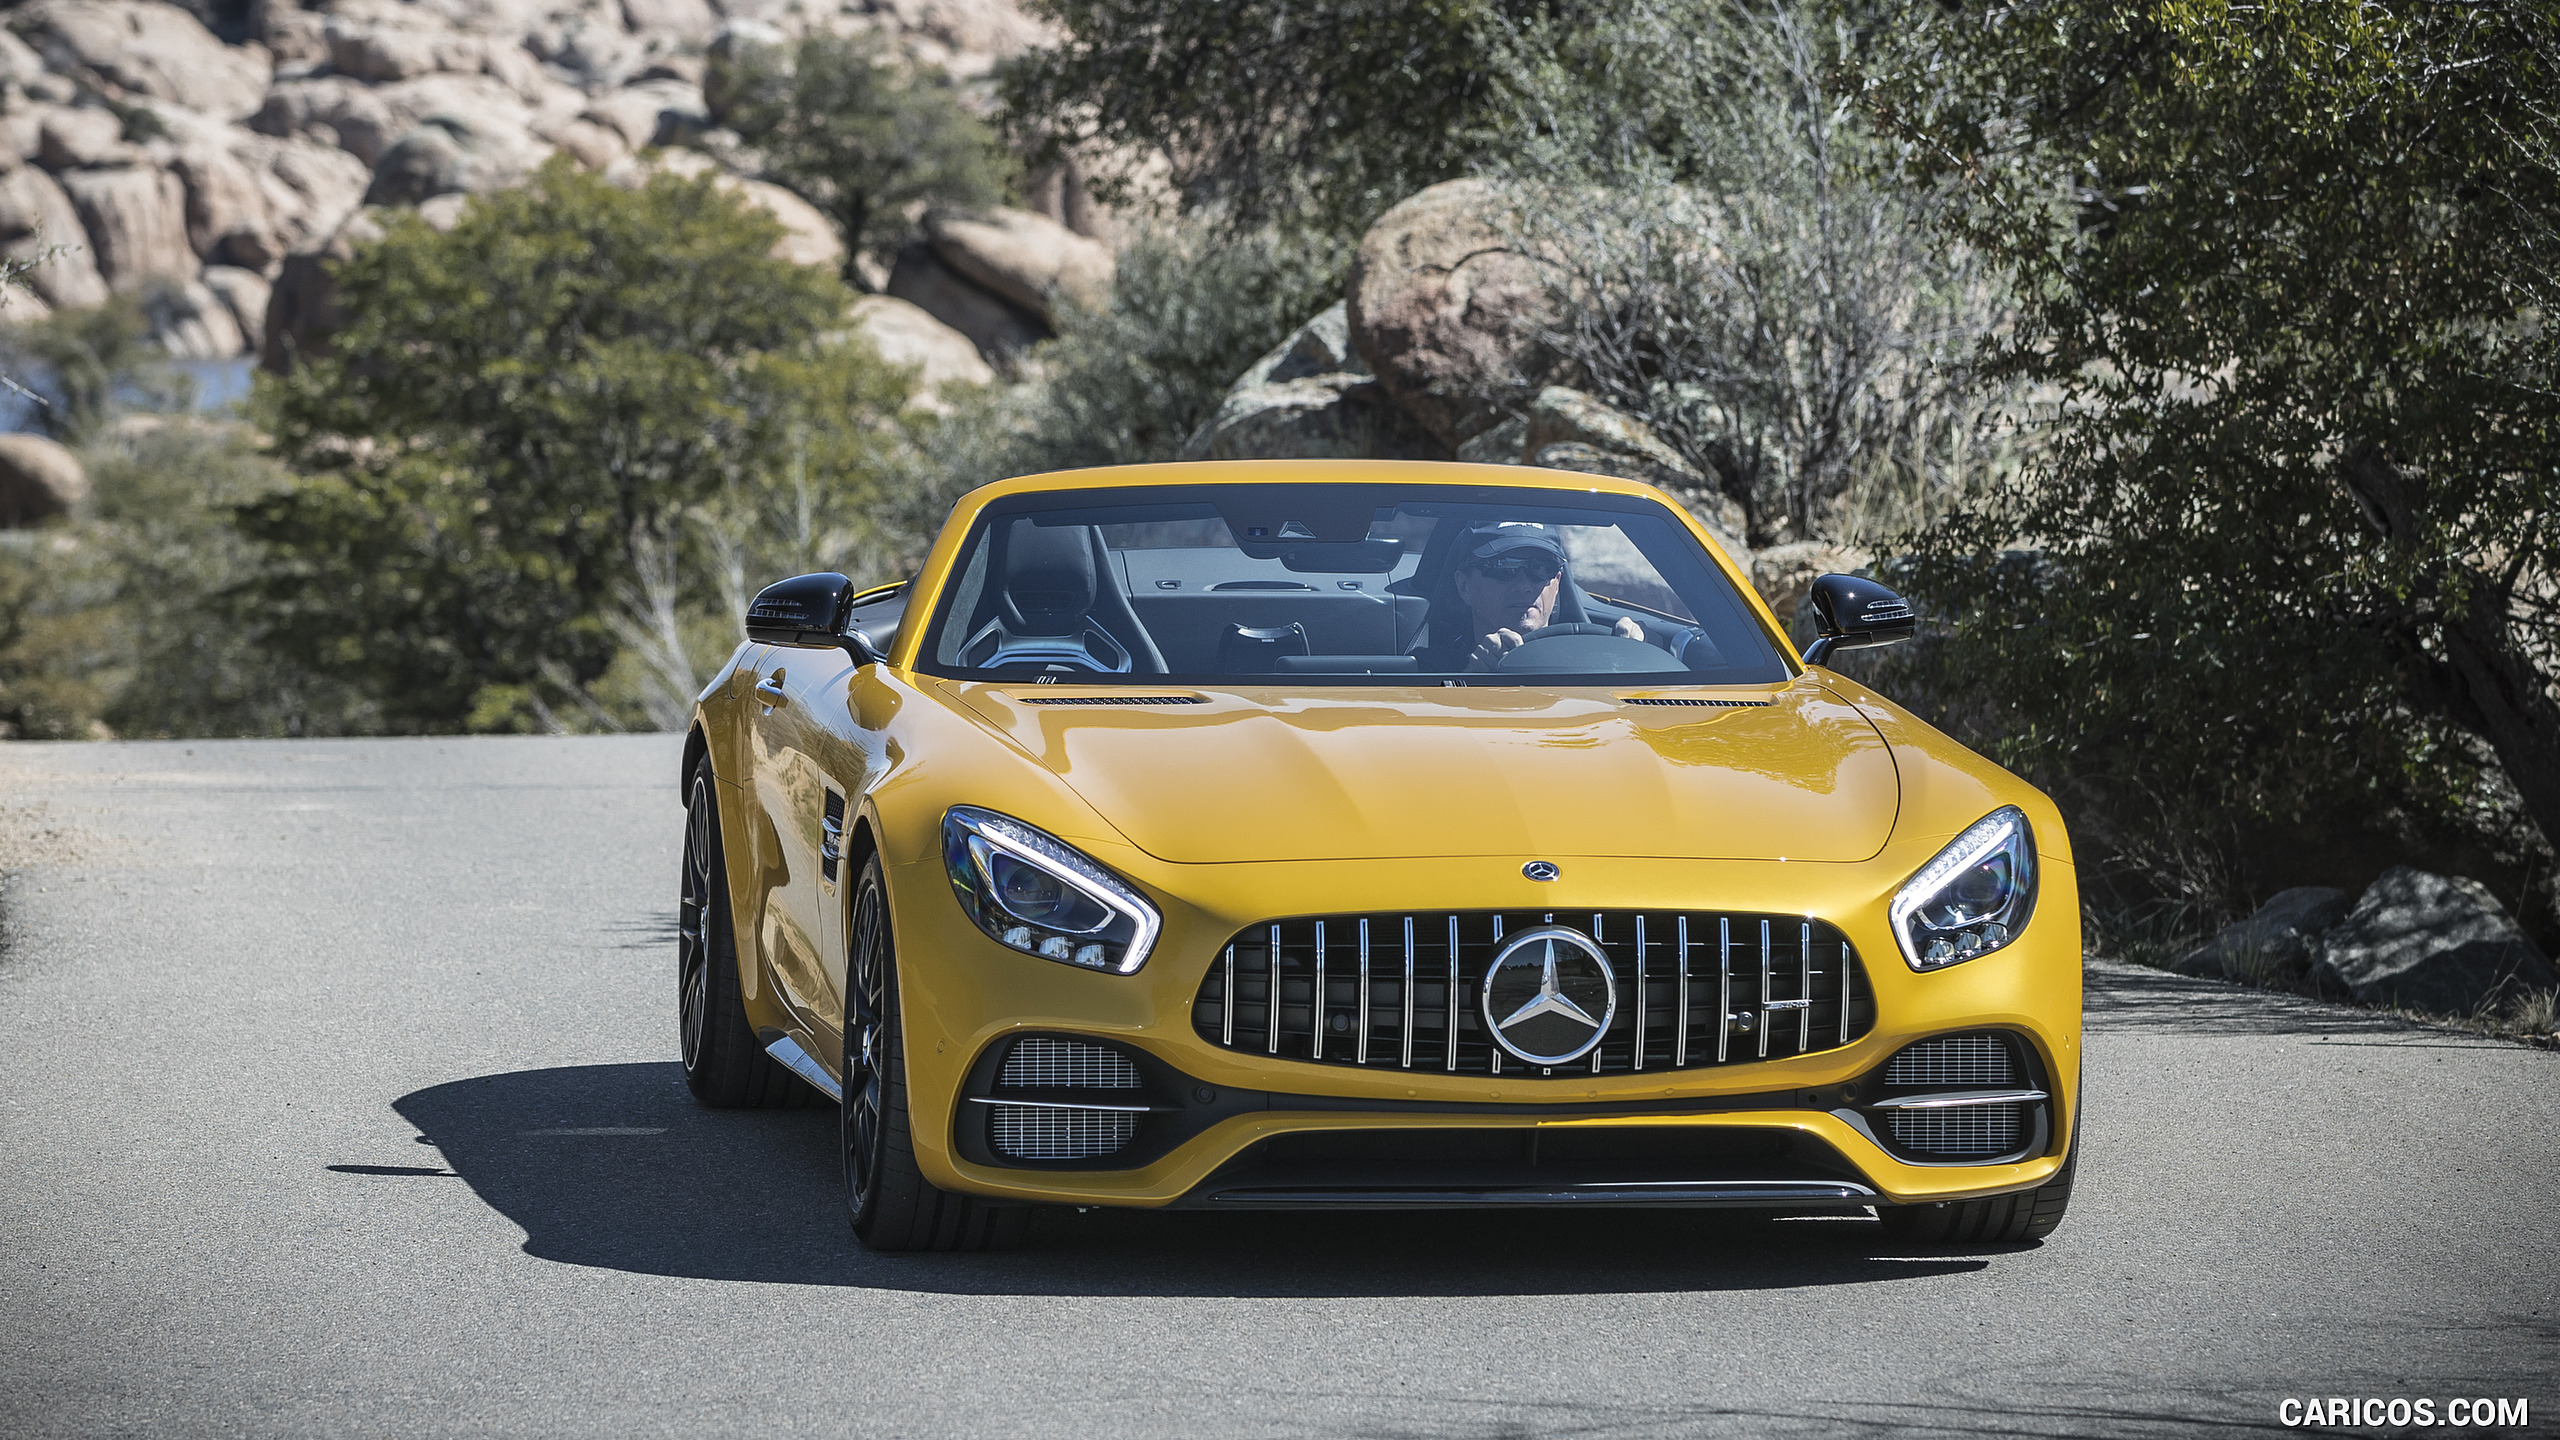 2018 Mercedes-AMG GT C Roadster - Front, #188 of 350